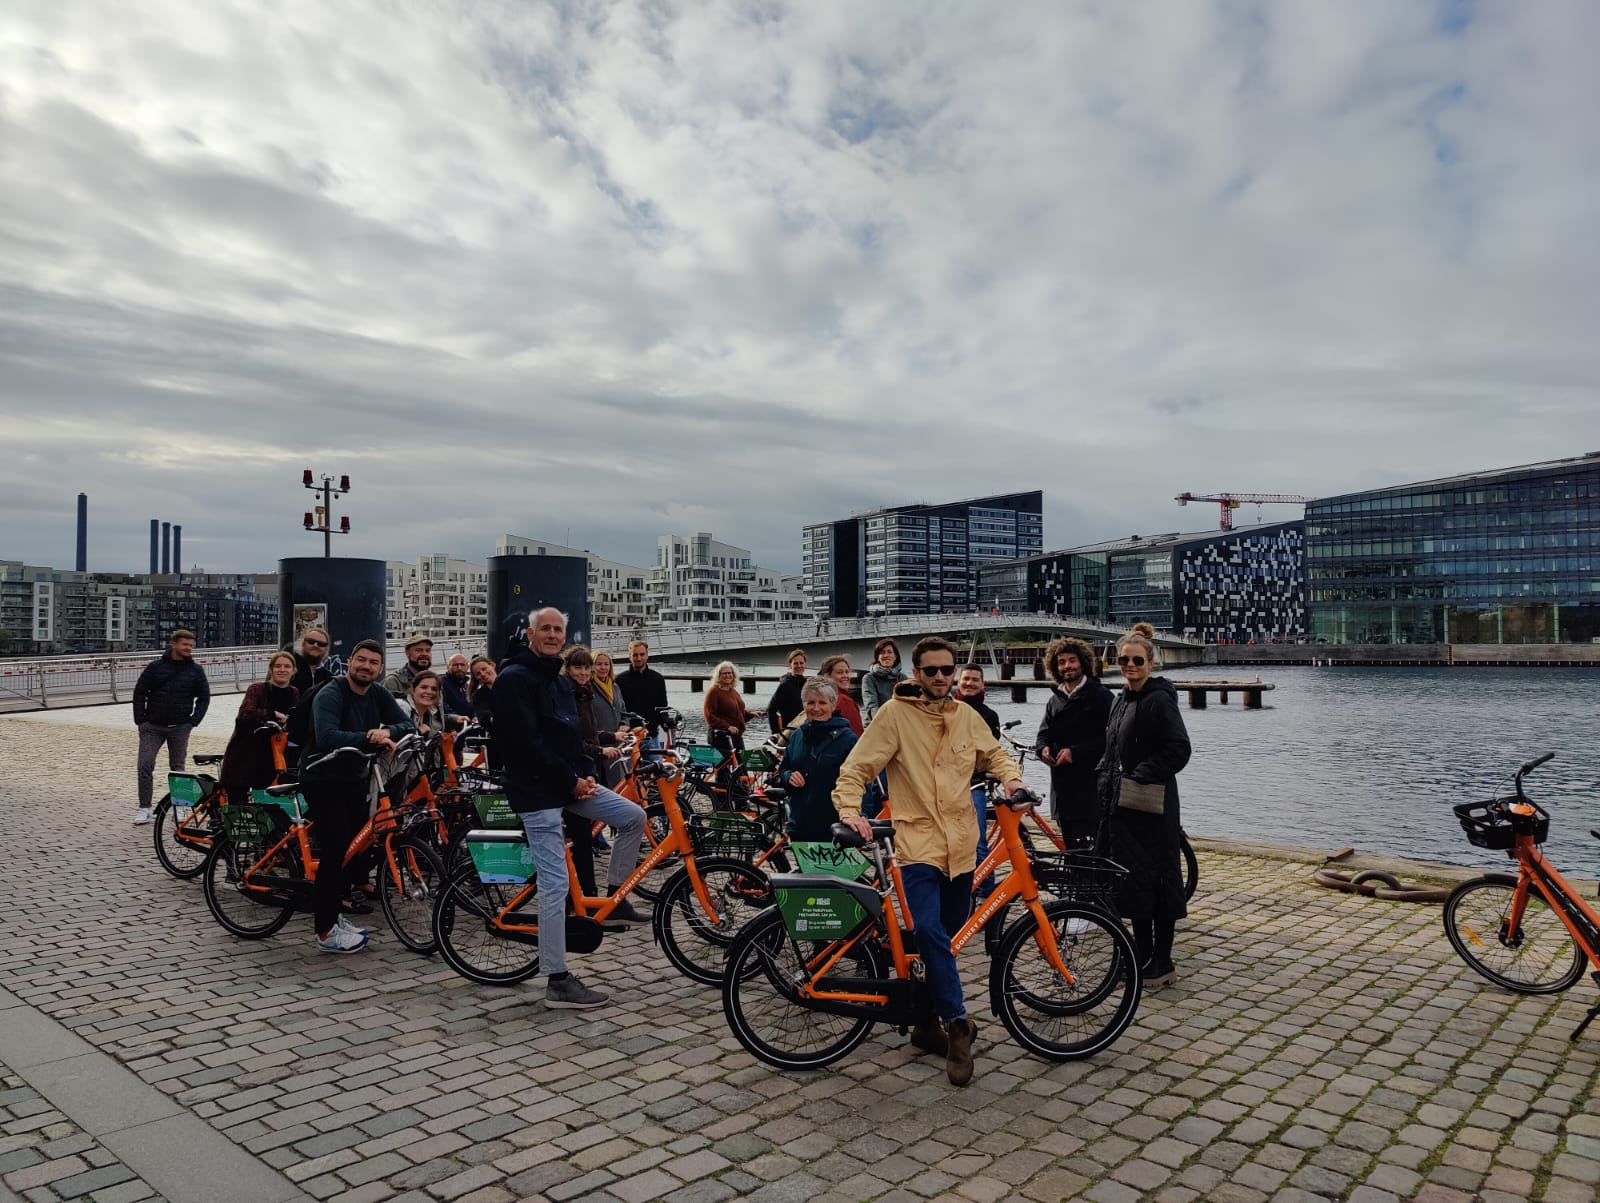 SMALL partner consortium group photo during cycling tour in Copenhagen